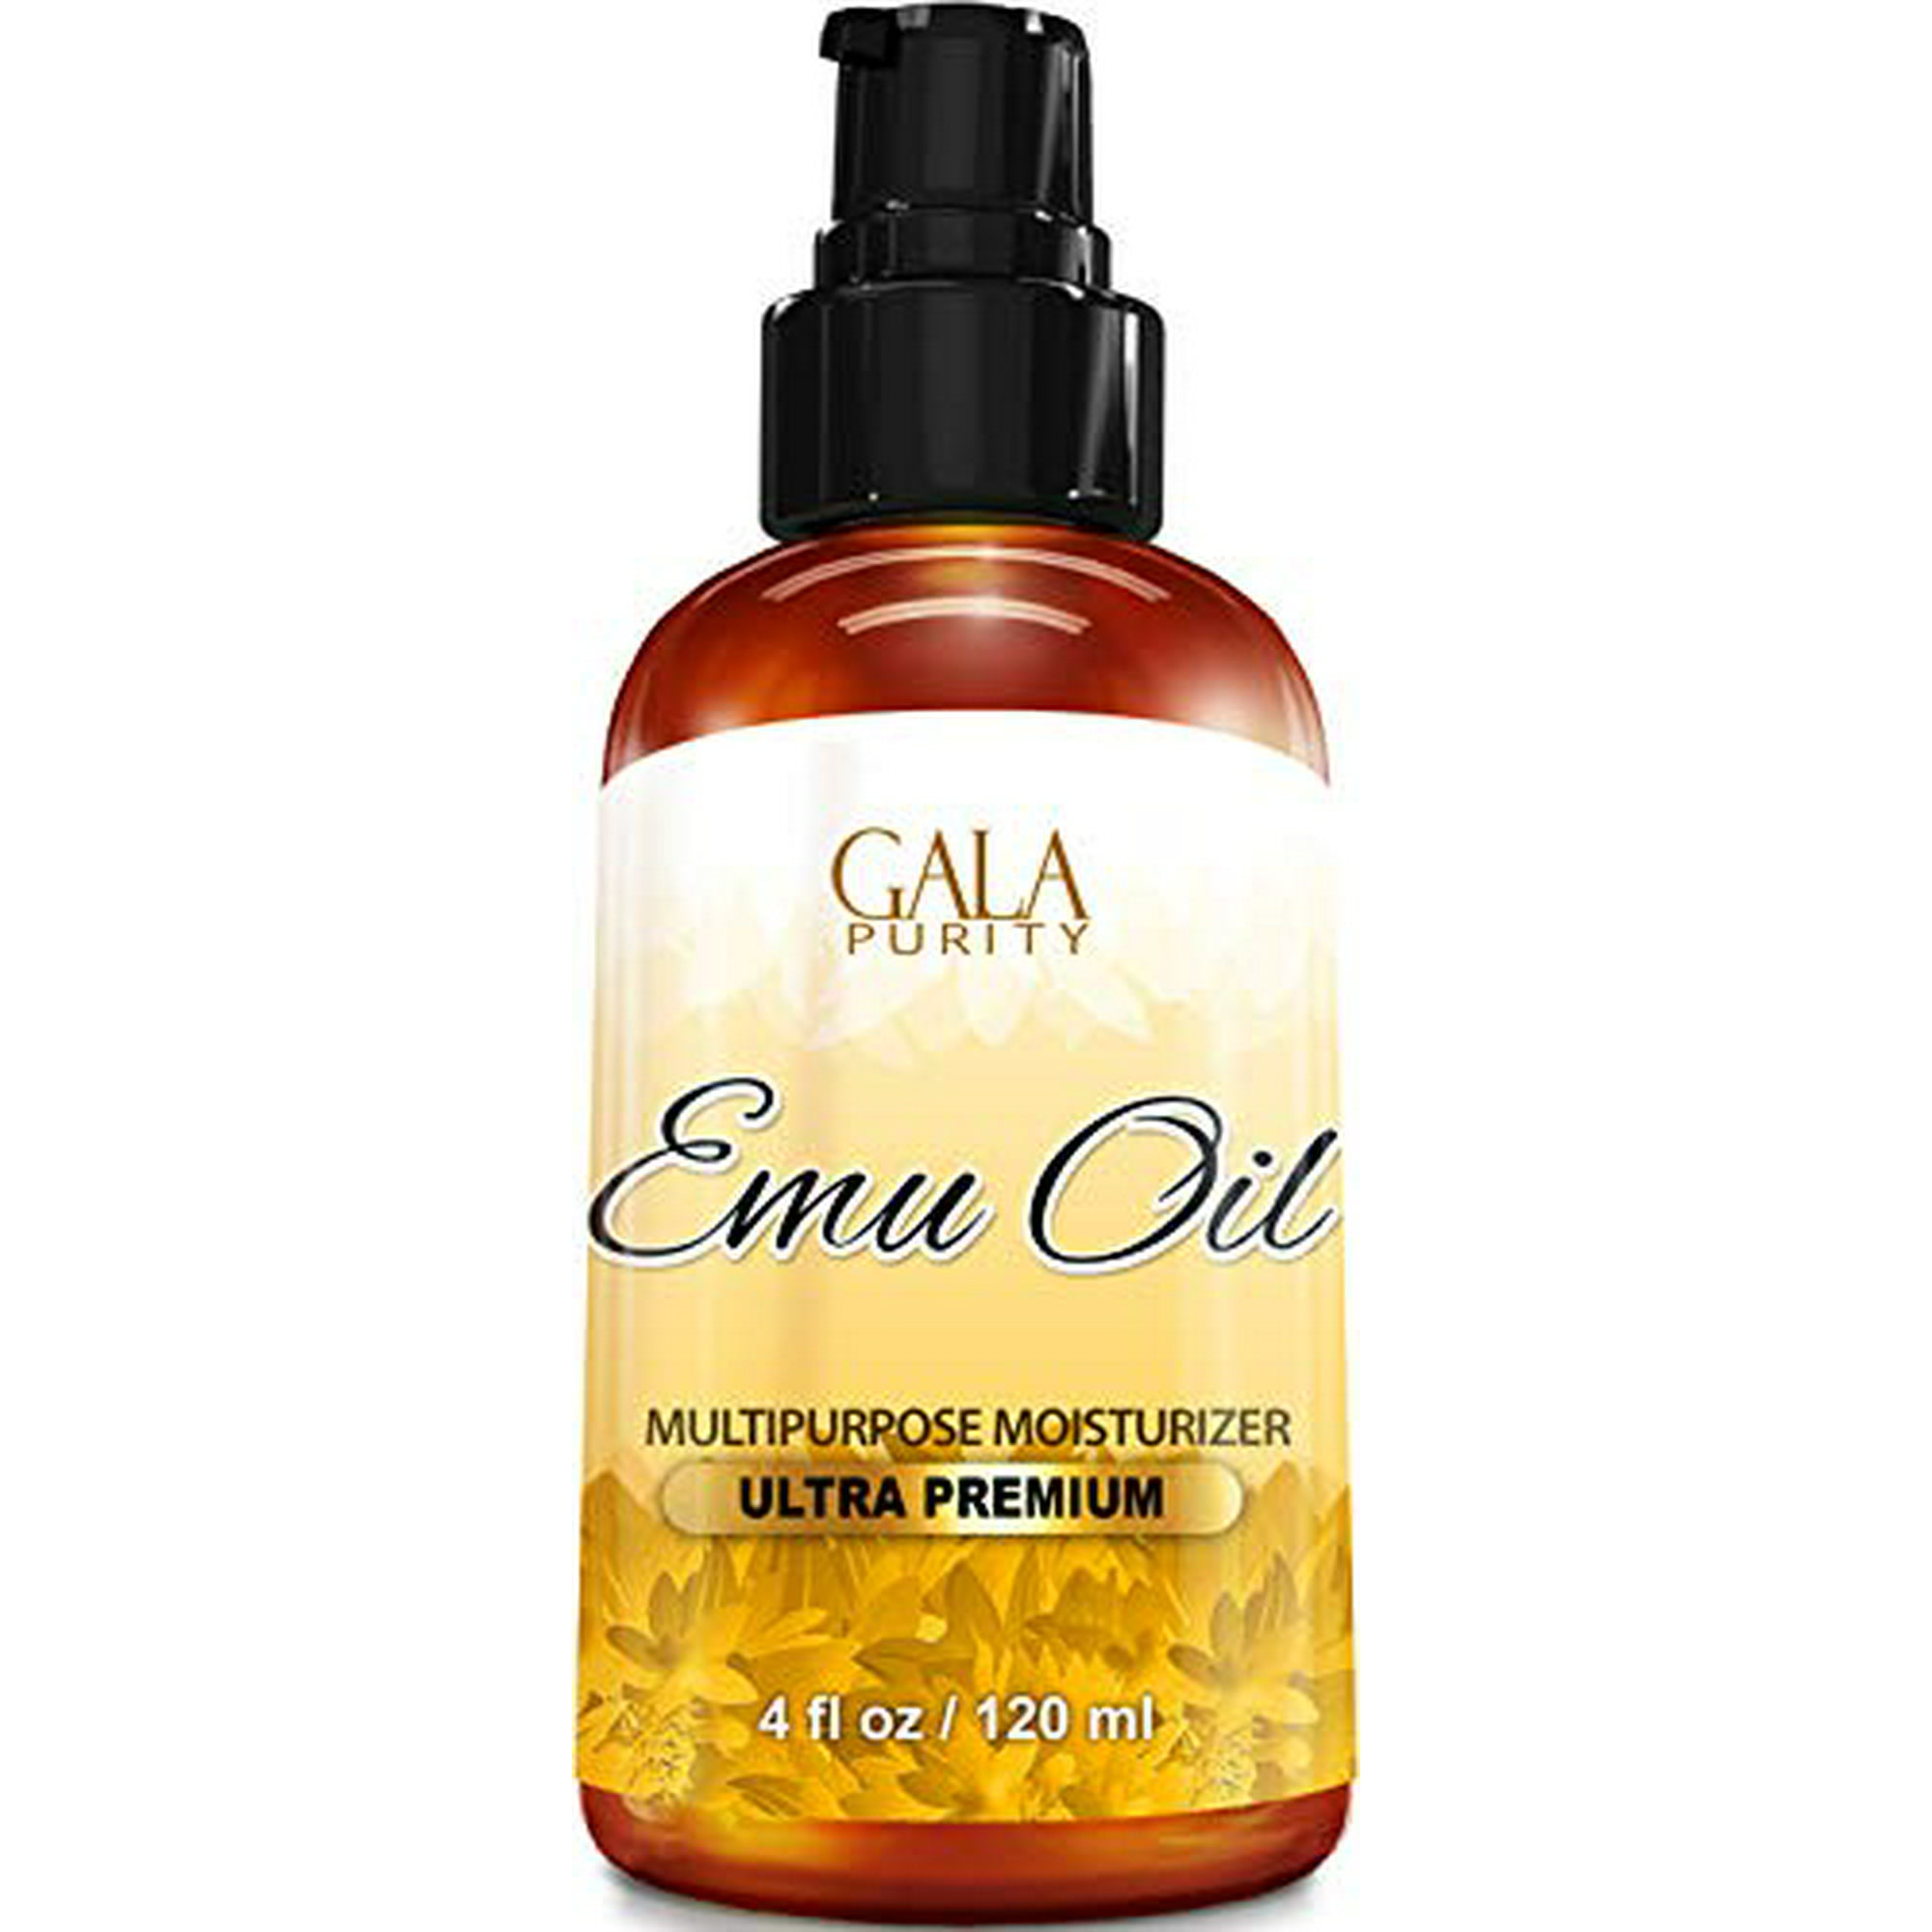 Gala Purity Emu Oil - Large 4oz - Best Natural Oil for Face, Skin, Hair  Growth, Stretch Marks, Scars, Nails, Muscle Joint Pain, and More | Walmart  Canada